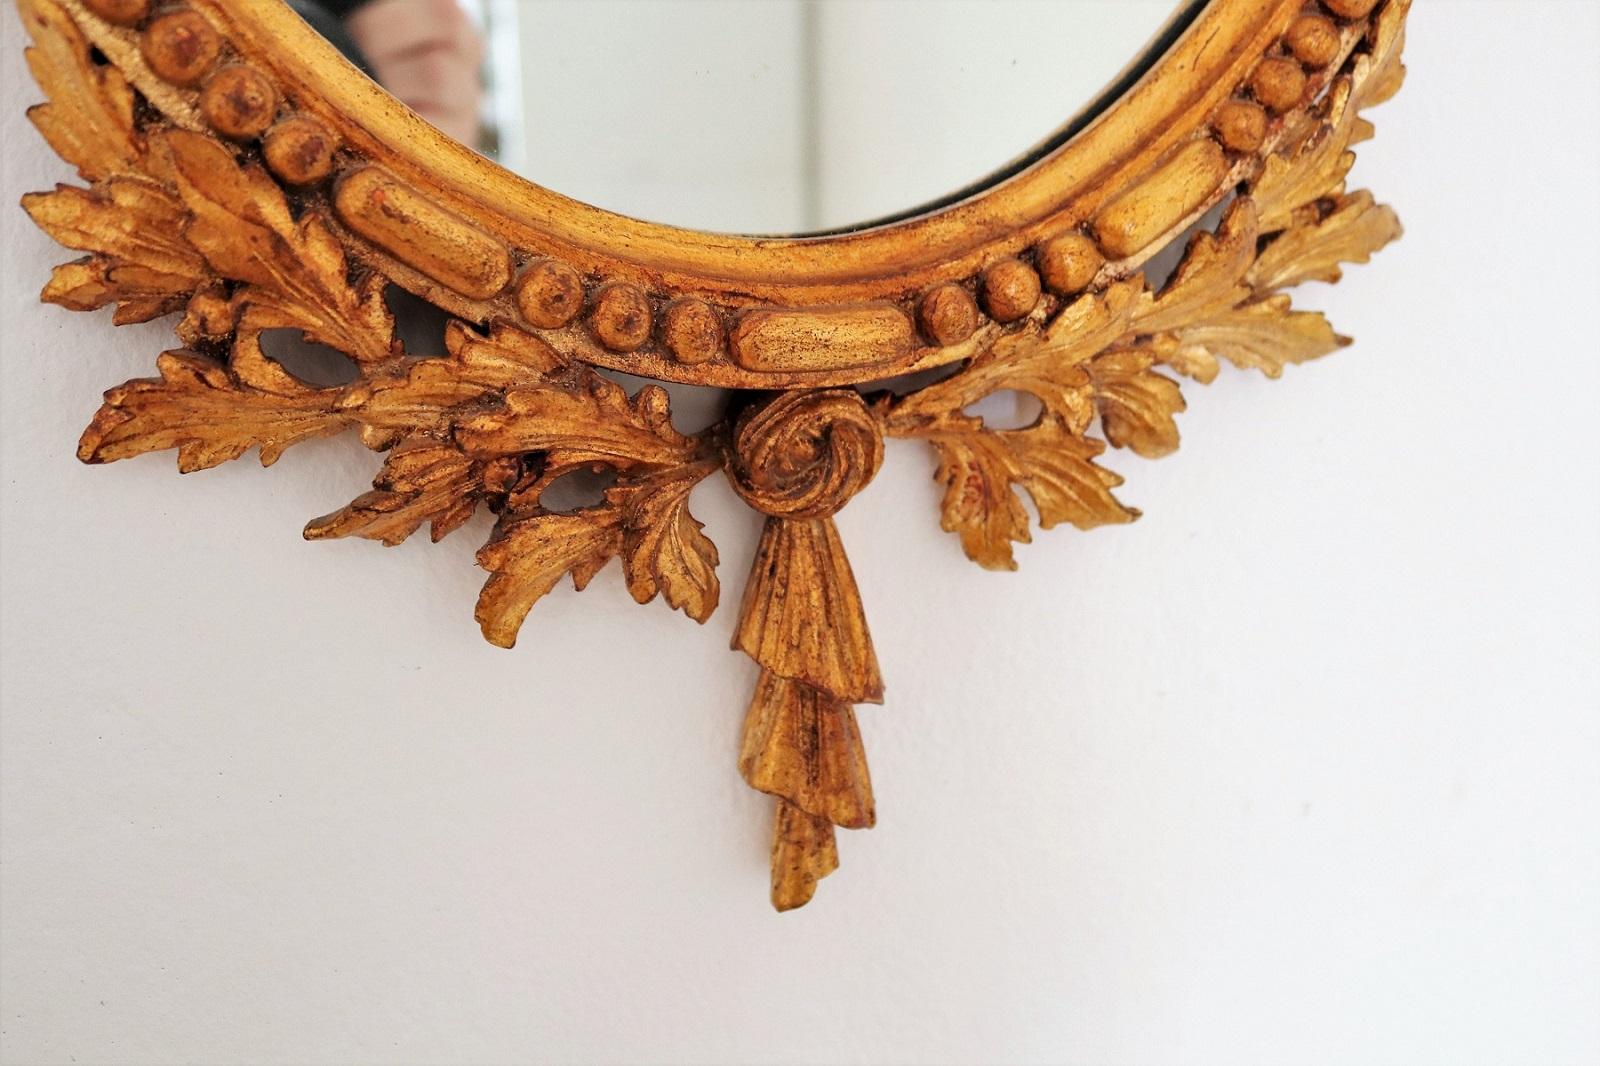 Italian Midcentury Carved Wall Mirror with Gilt Wooden Frame, 1950s (Mitte des 20. Jahrhunderts)